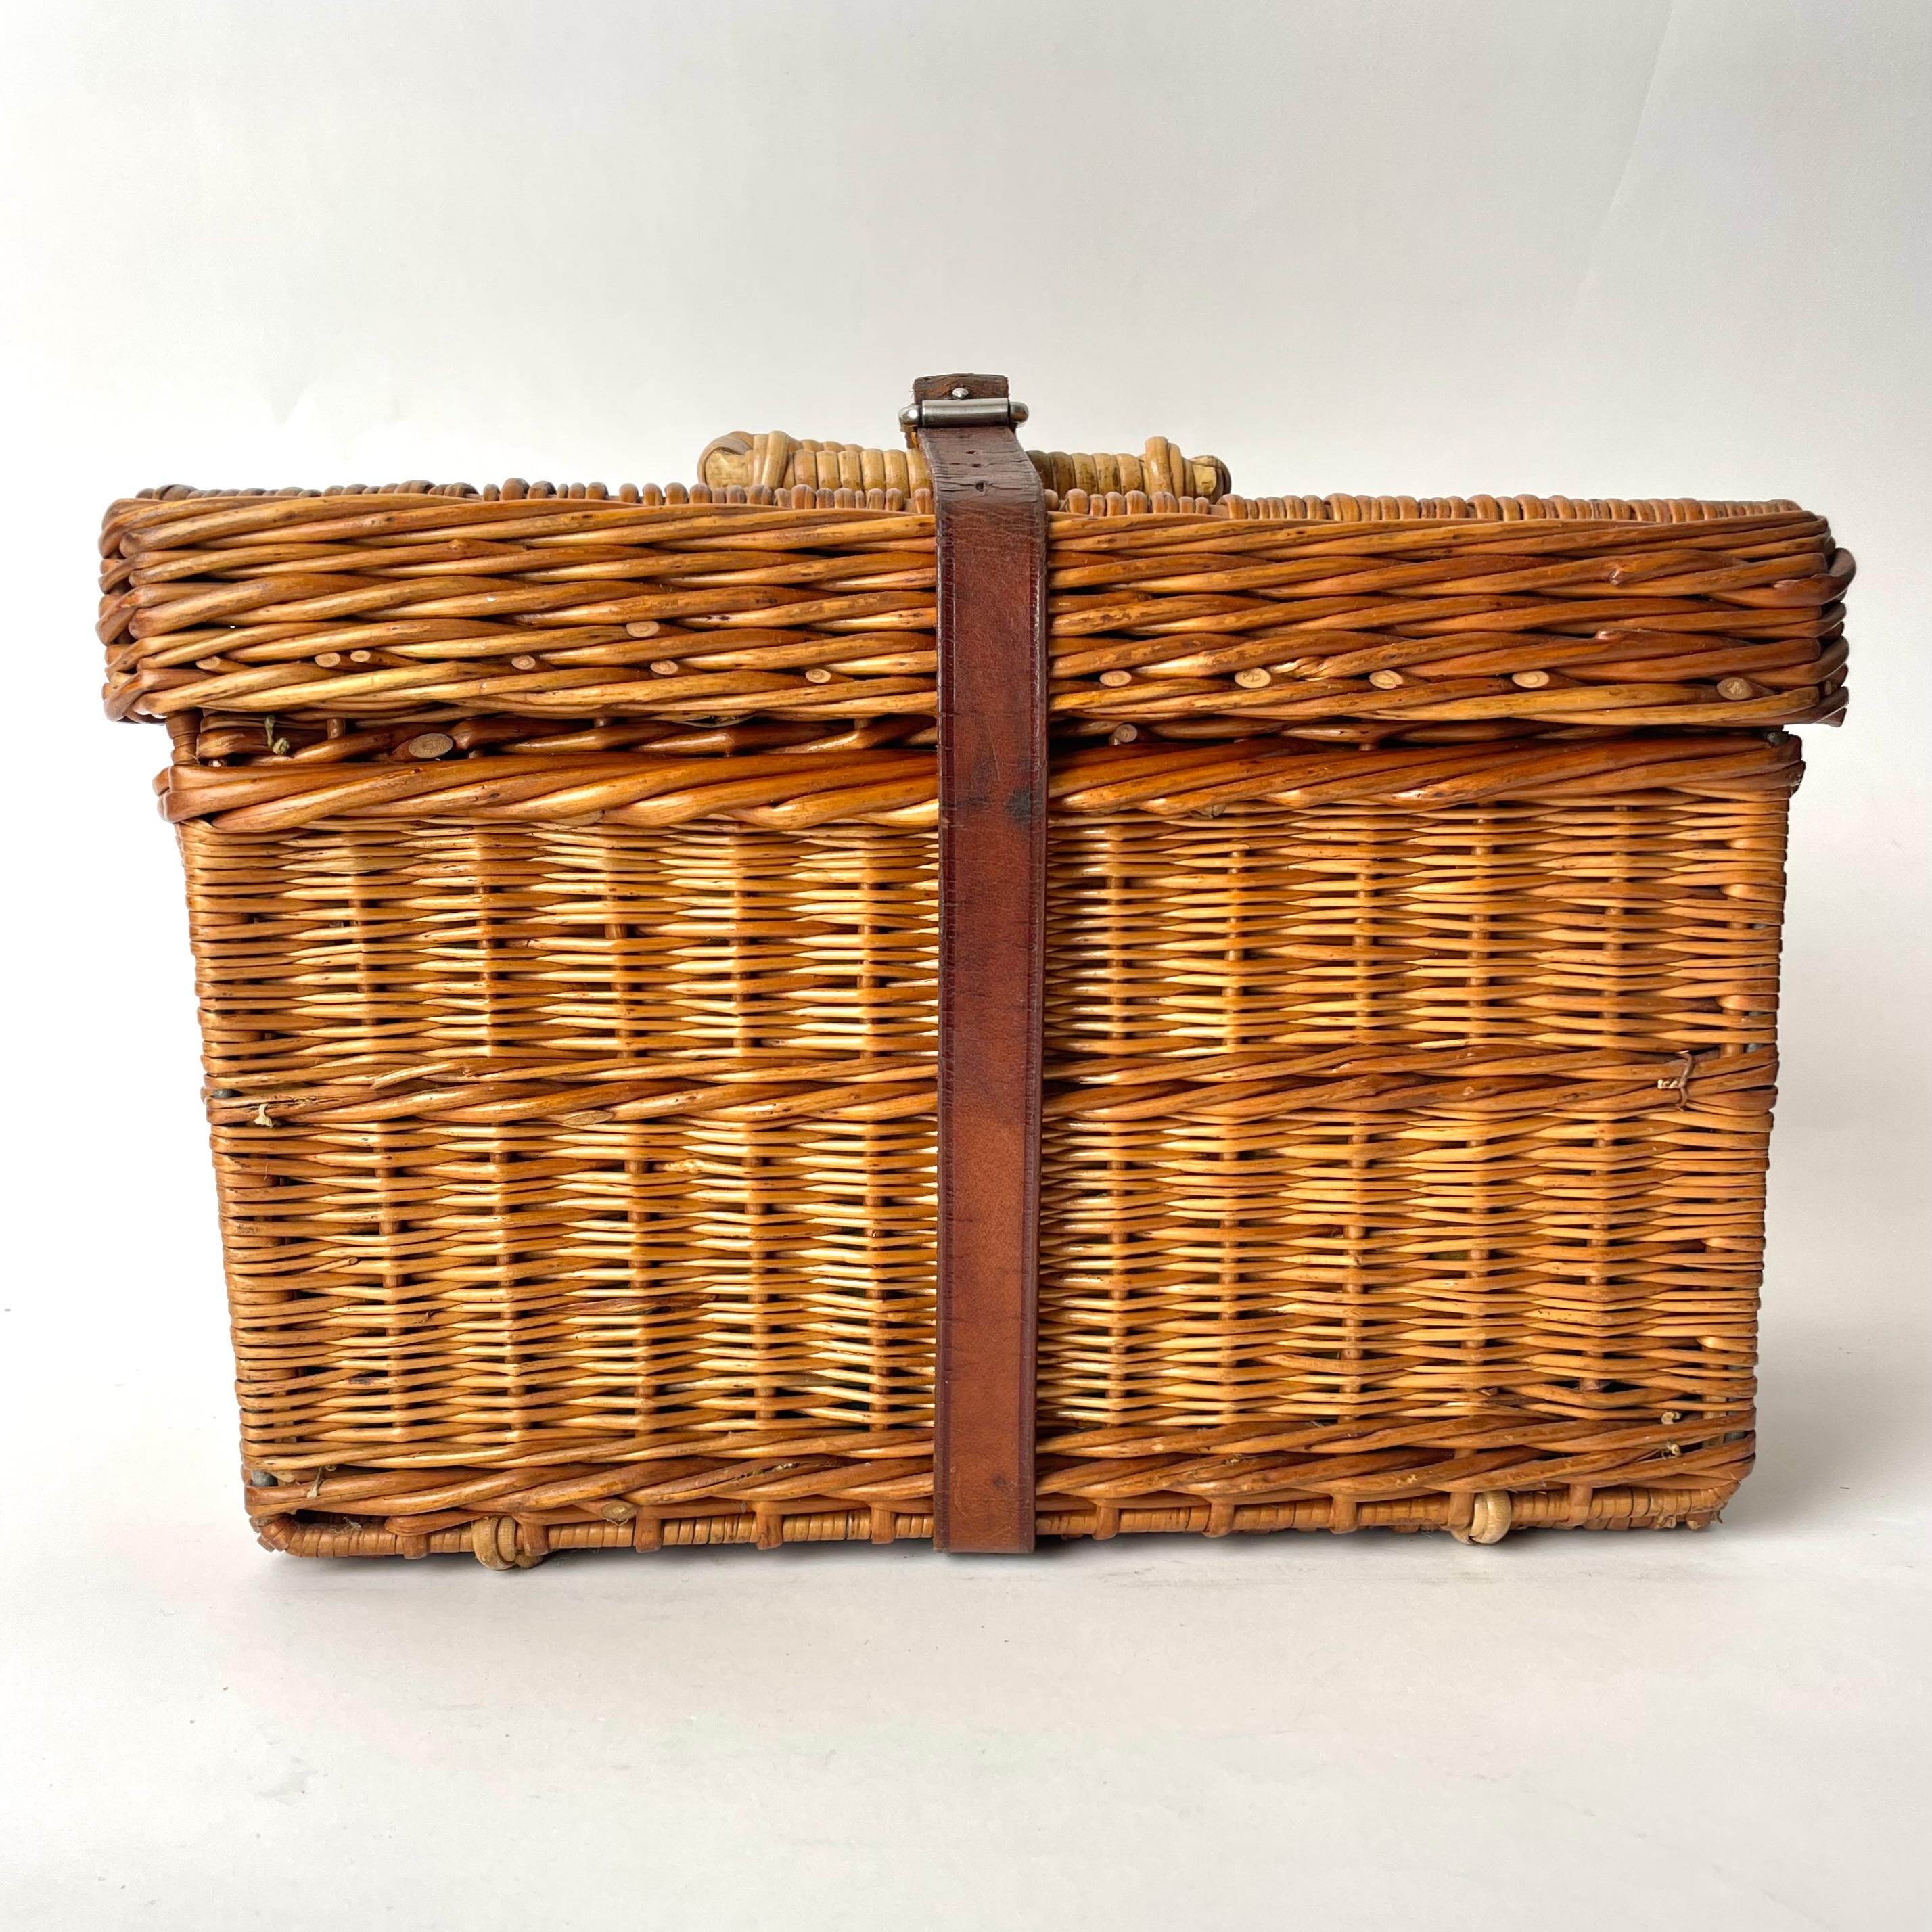 English Picnic Basket, Rattan with Tinplate & Porcelain Interiors Late 19th/Early 20th C For Sale